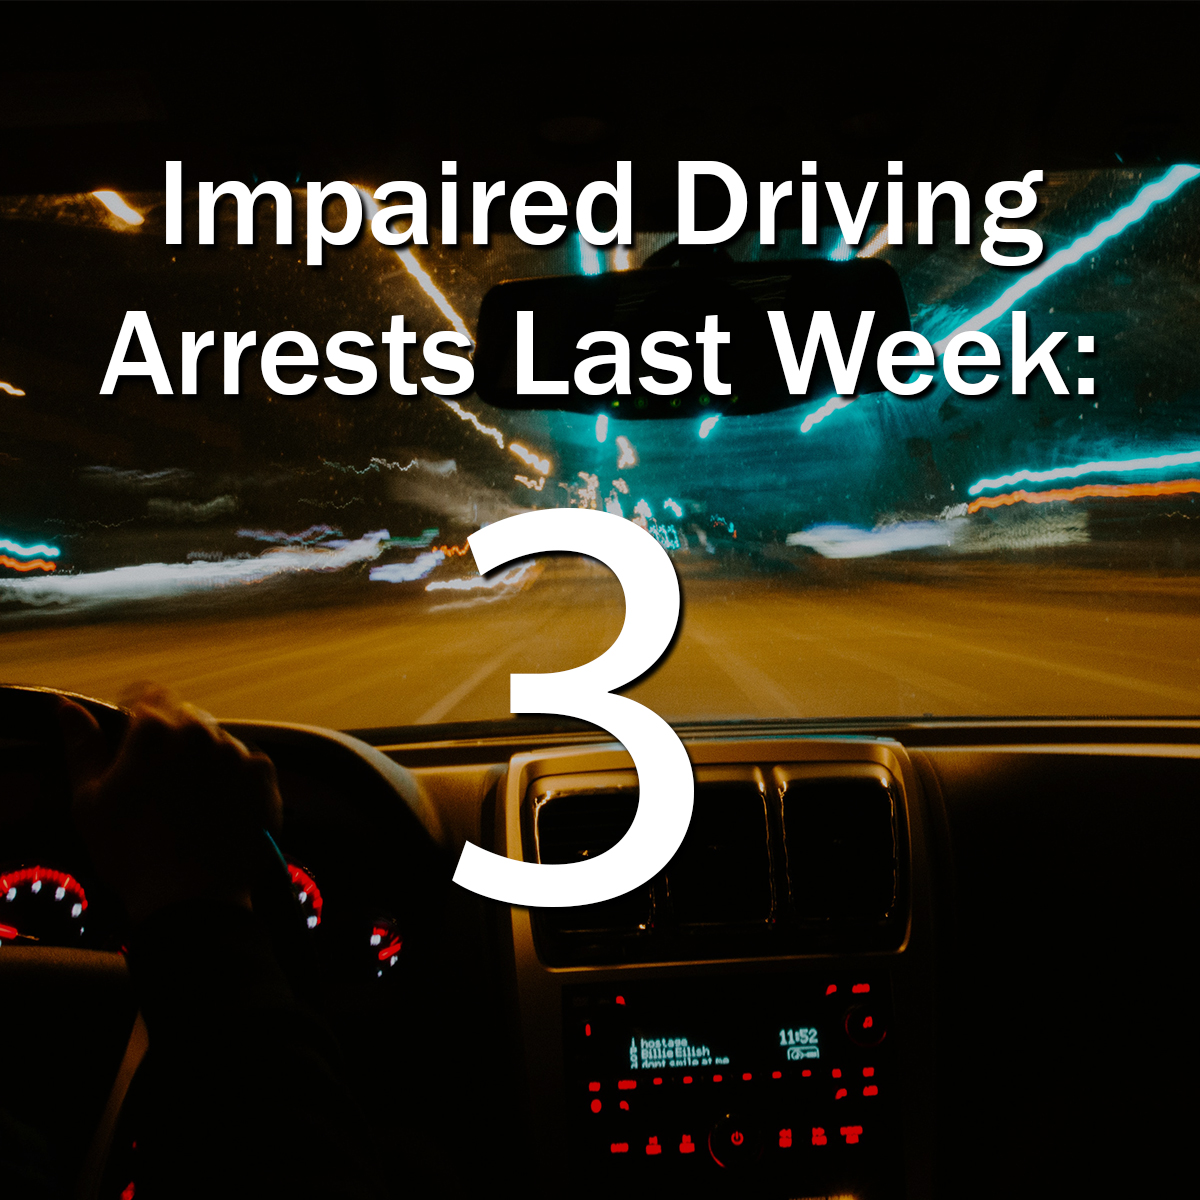 Criminal Impaired Driving Offences: Feb. 16 to Feb. 20